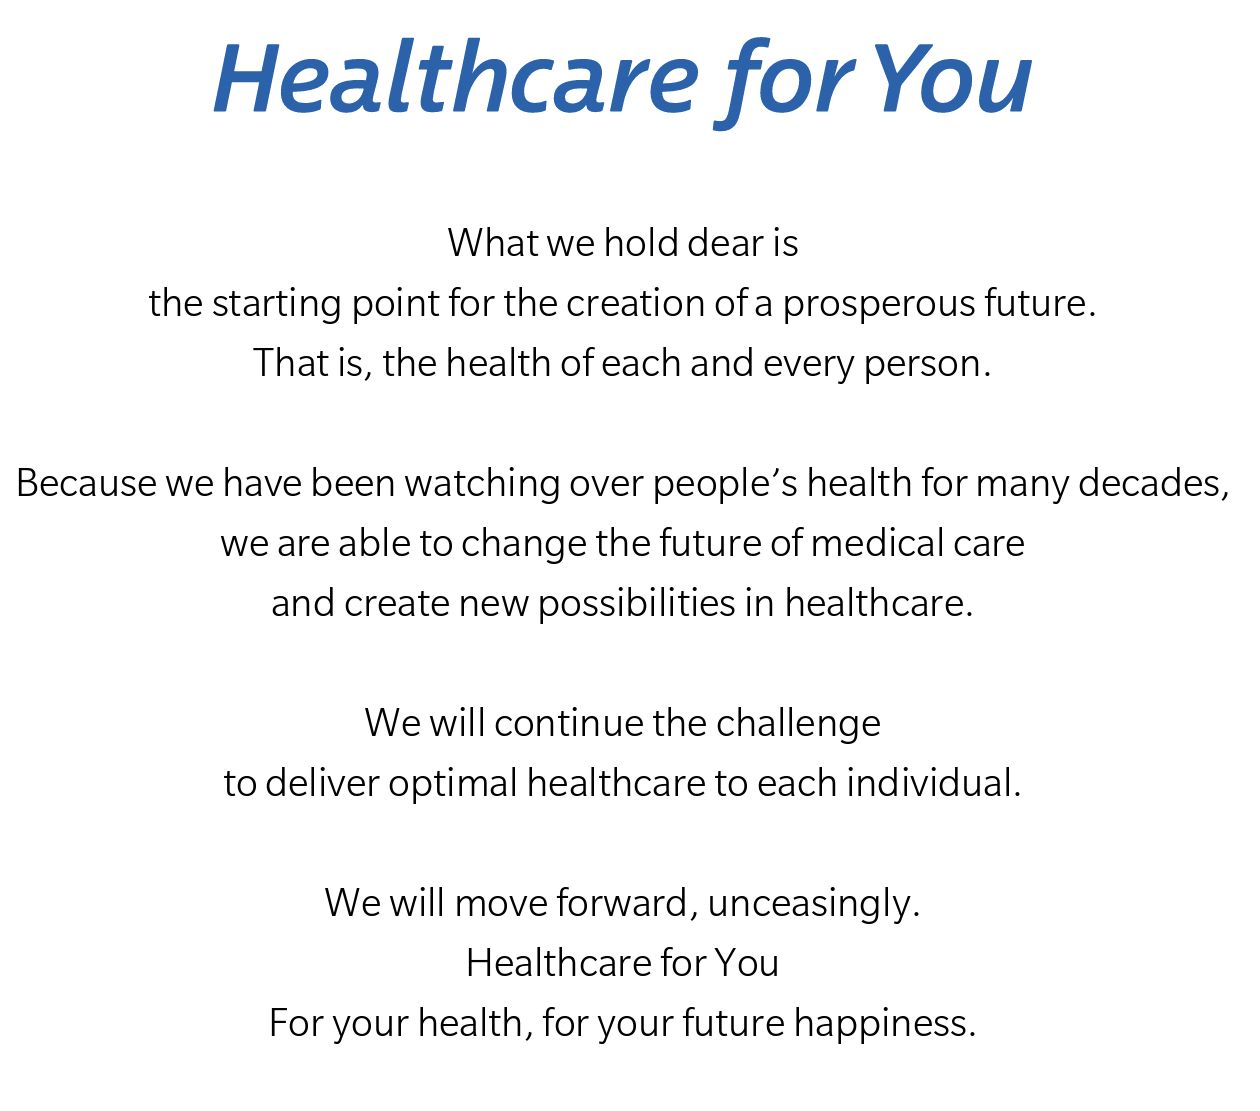 What we hold dear is the starting point for the creation of a prosperous future. That is, the health of each and every person. Because we have been watching over people's health for many decades, we are able to change the future of medical care and create new possibilities in healthcare. We will continue the challenge to deliver optimal healthcare to each individual. We will move forward, unceasingly. Healthcare for You For your health, for your future happiness.